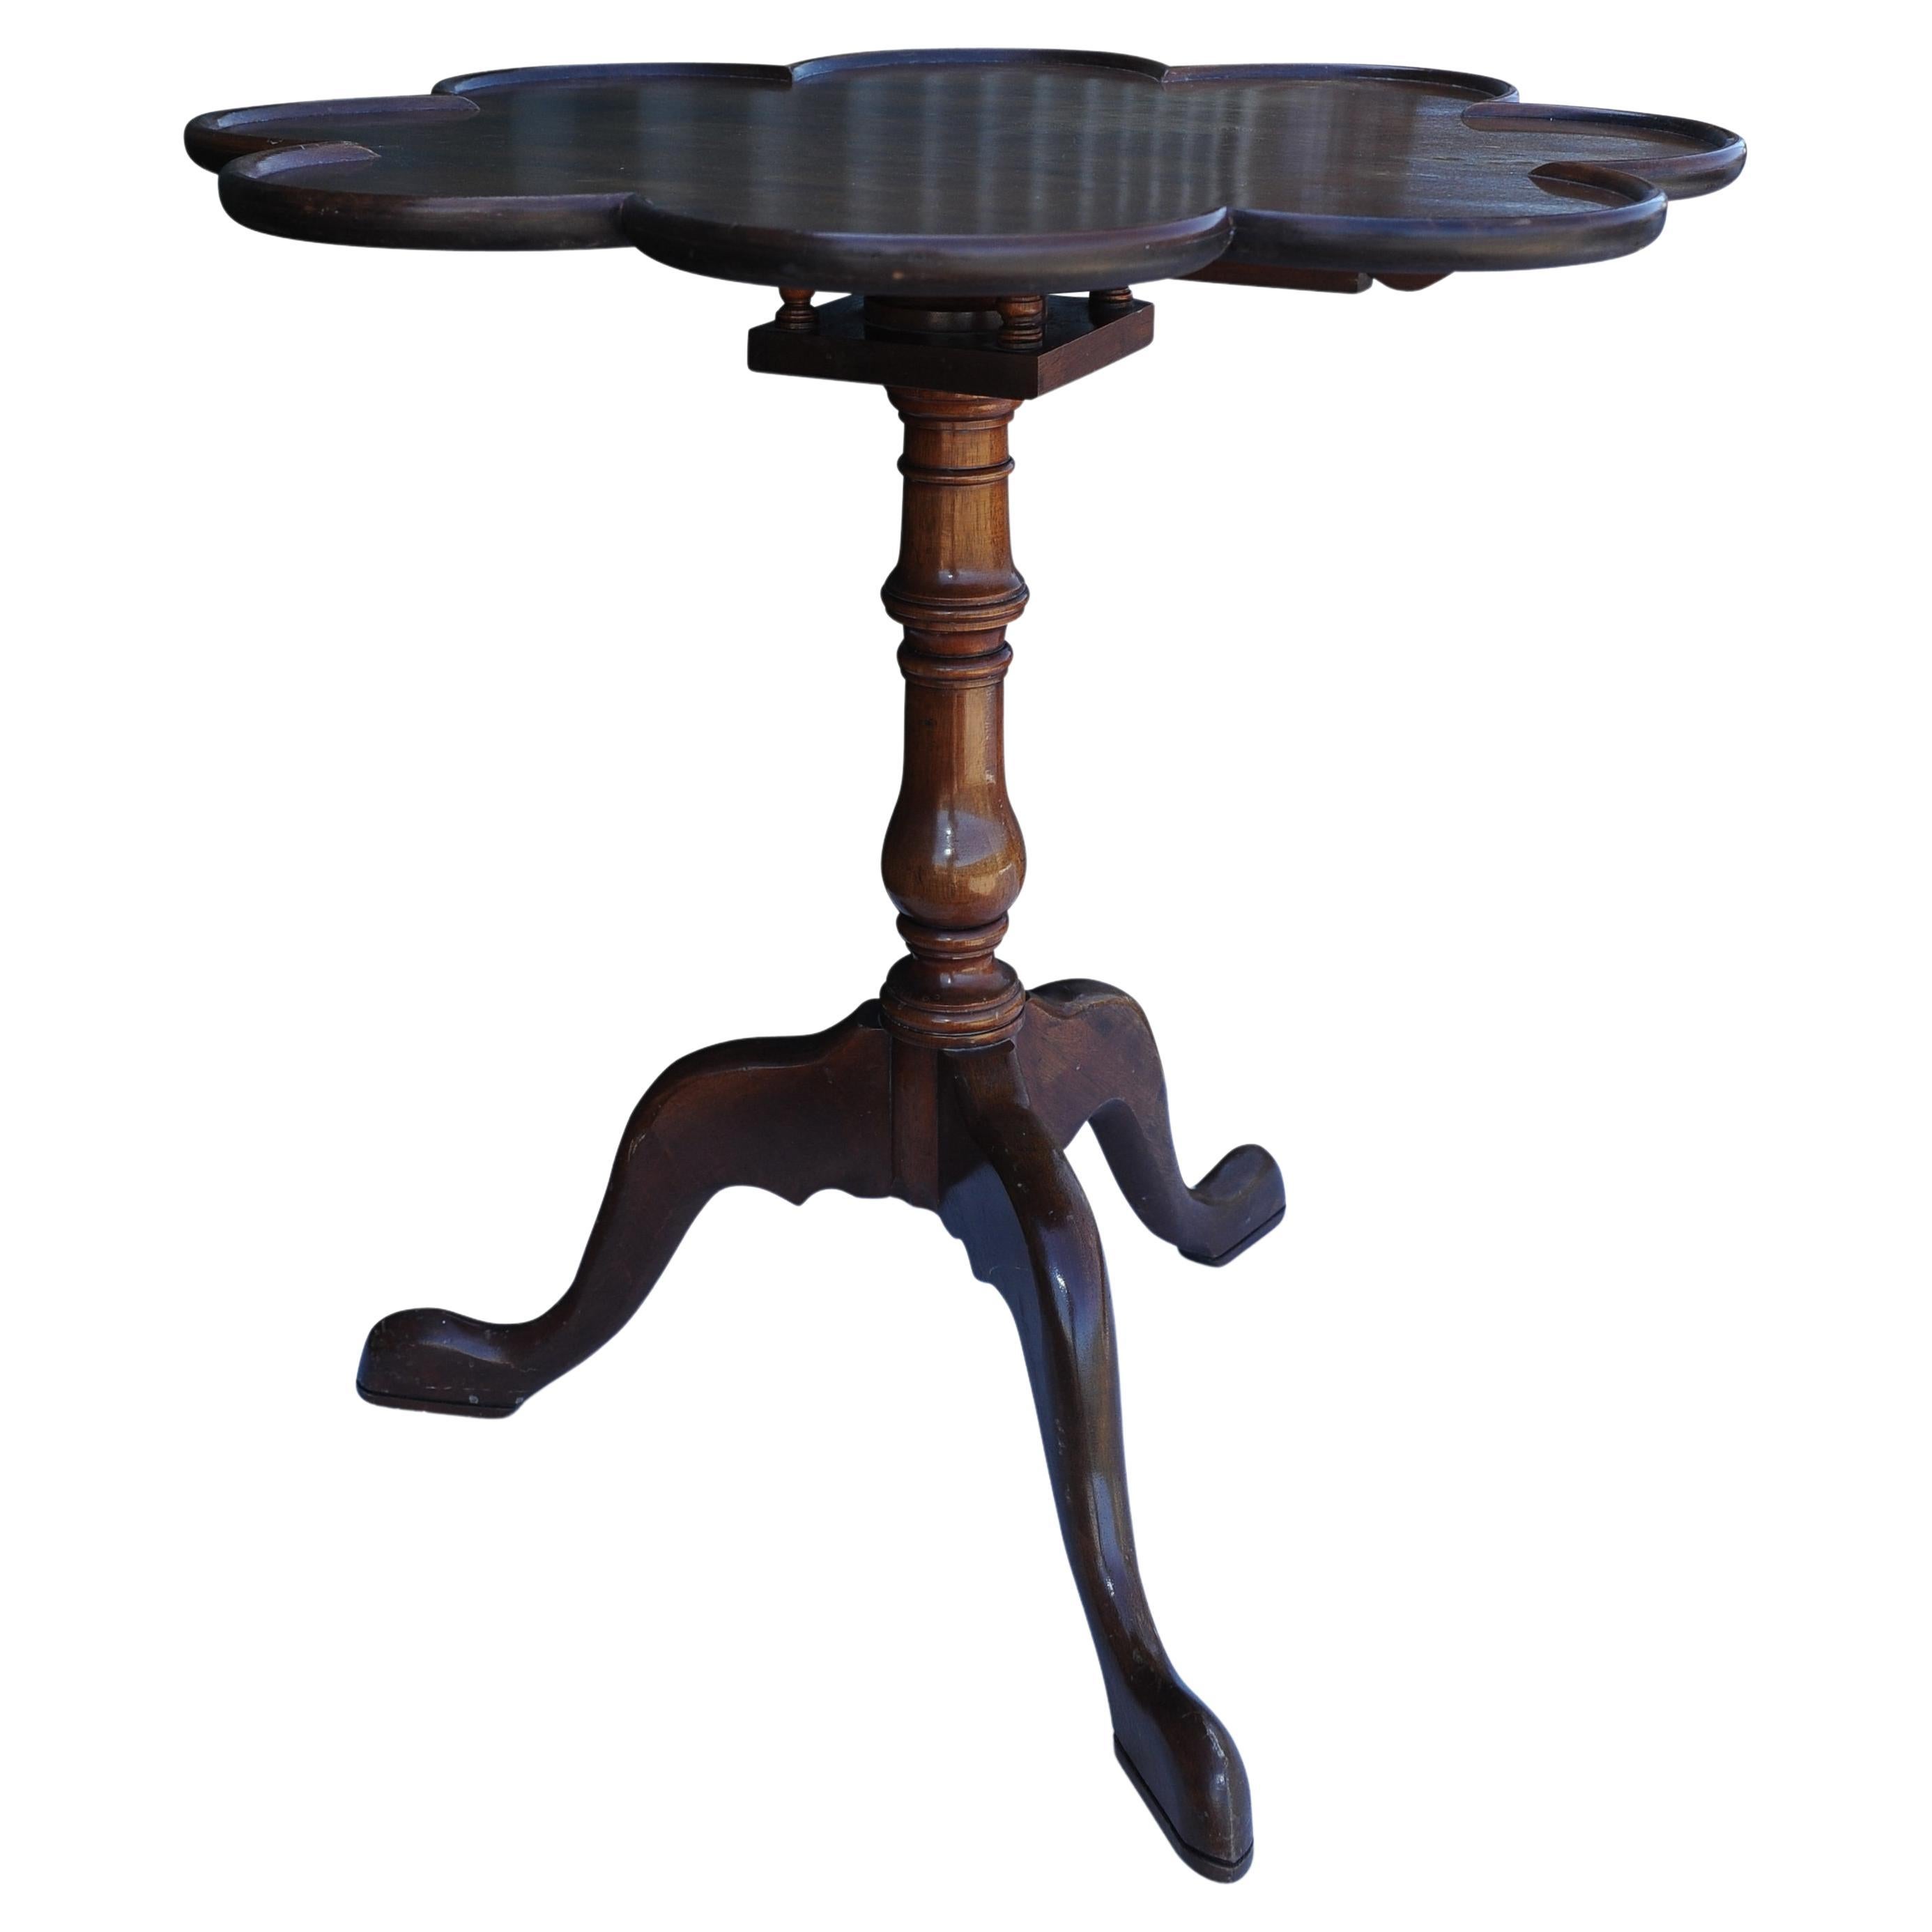 George II Mahogany Scalloped Edged Tripod Tilt Top Table On A Birdcage Centre
Types of furniture associated with social interactions—especially the serving and drinking of tea—were indispensable components of fashionable parlors during the second